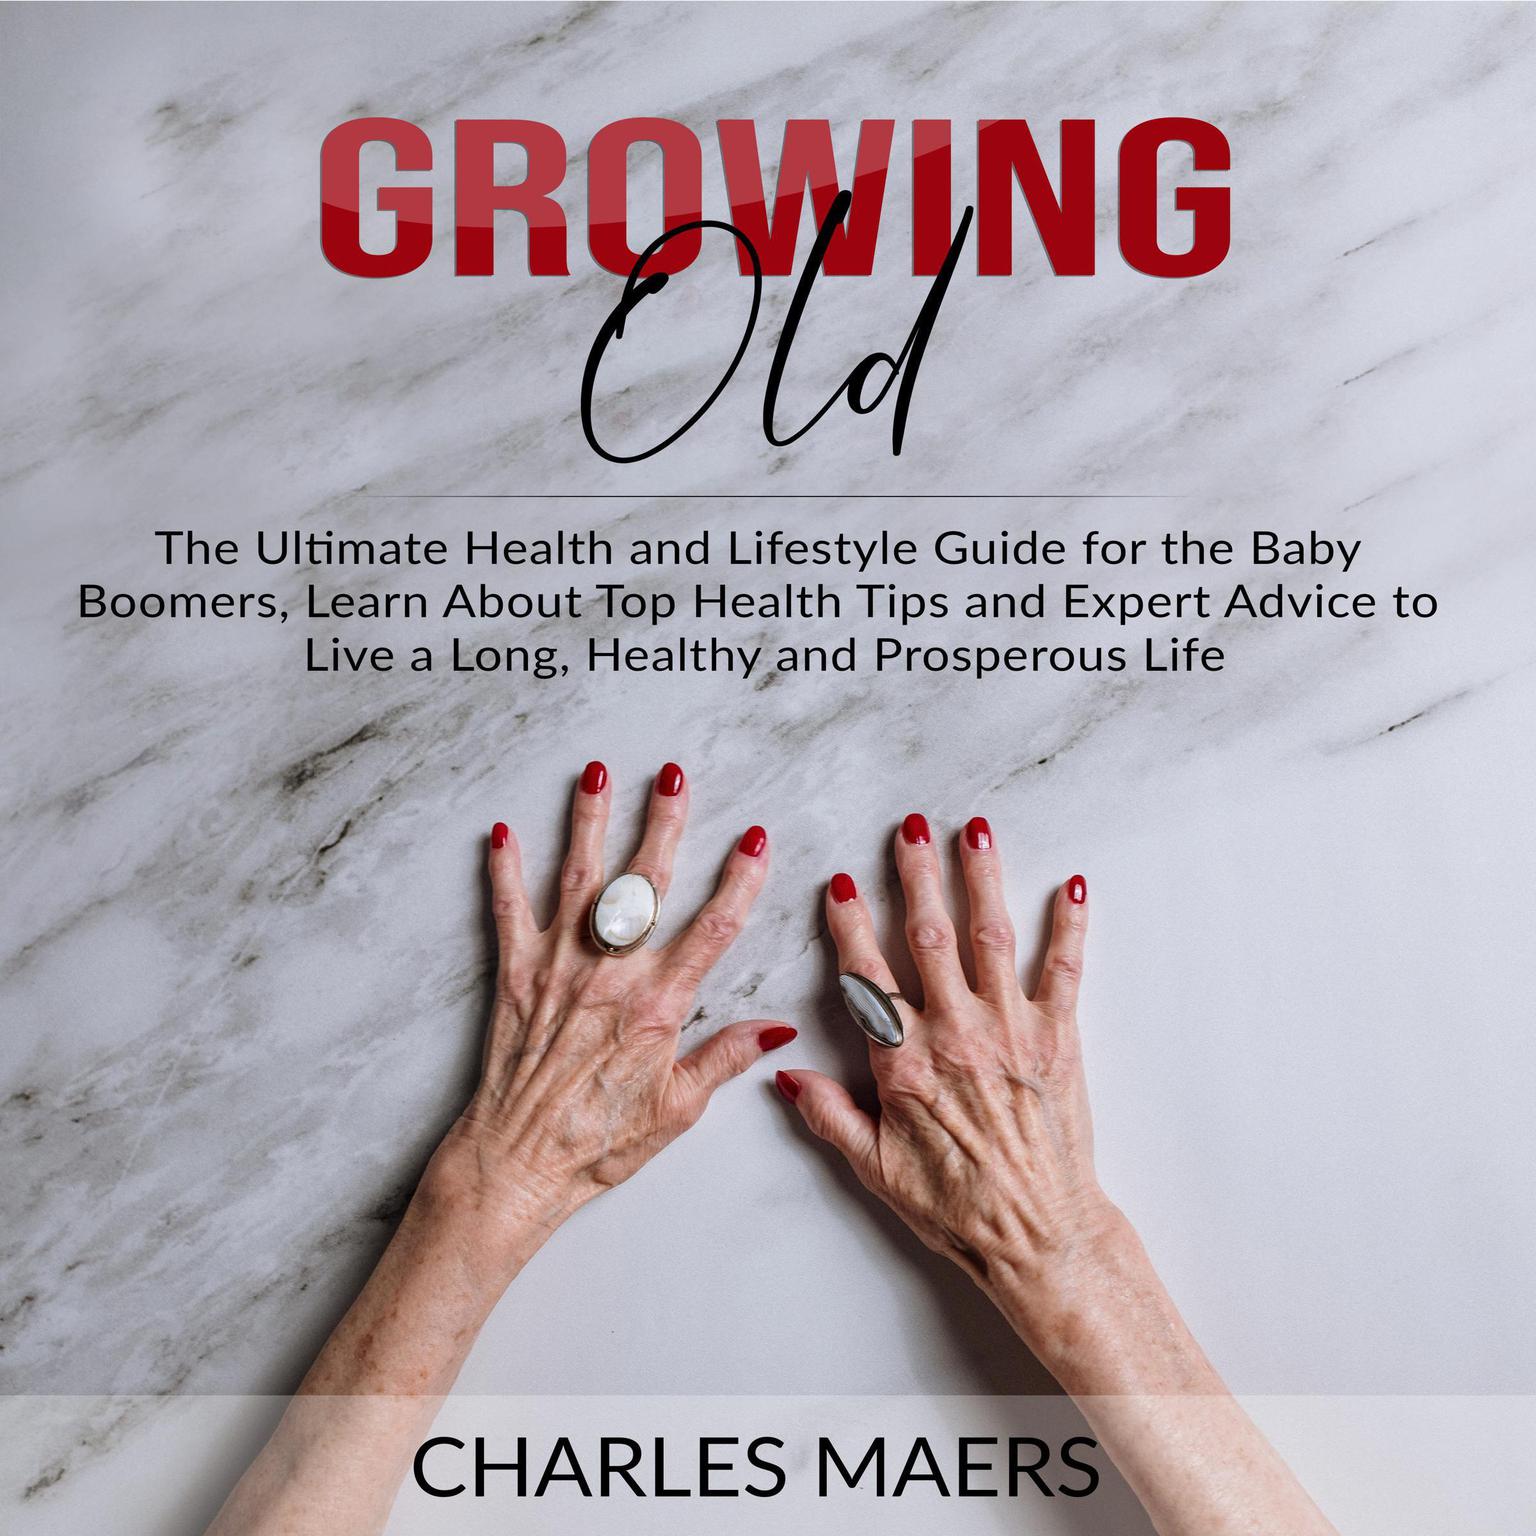 Growing Old: The Ultimate Health and Lifestyle Guide for the Baby Boomers, Learn About Top Health Tips and Expert Advice to Live a Long, Healthy and Prosperous Life Audiobook, by Charles Maers